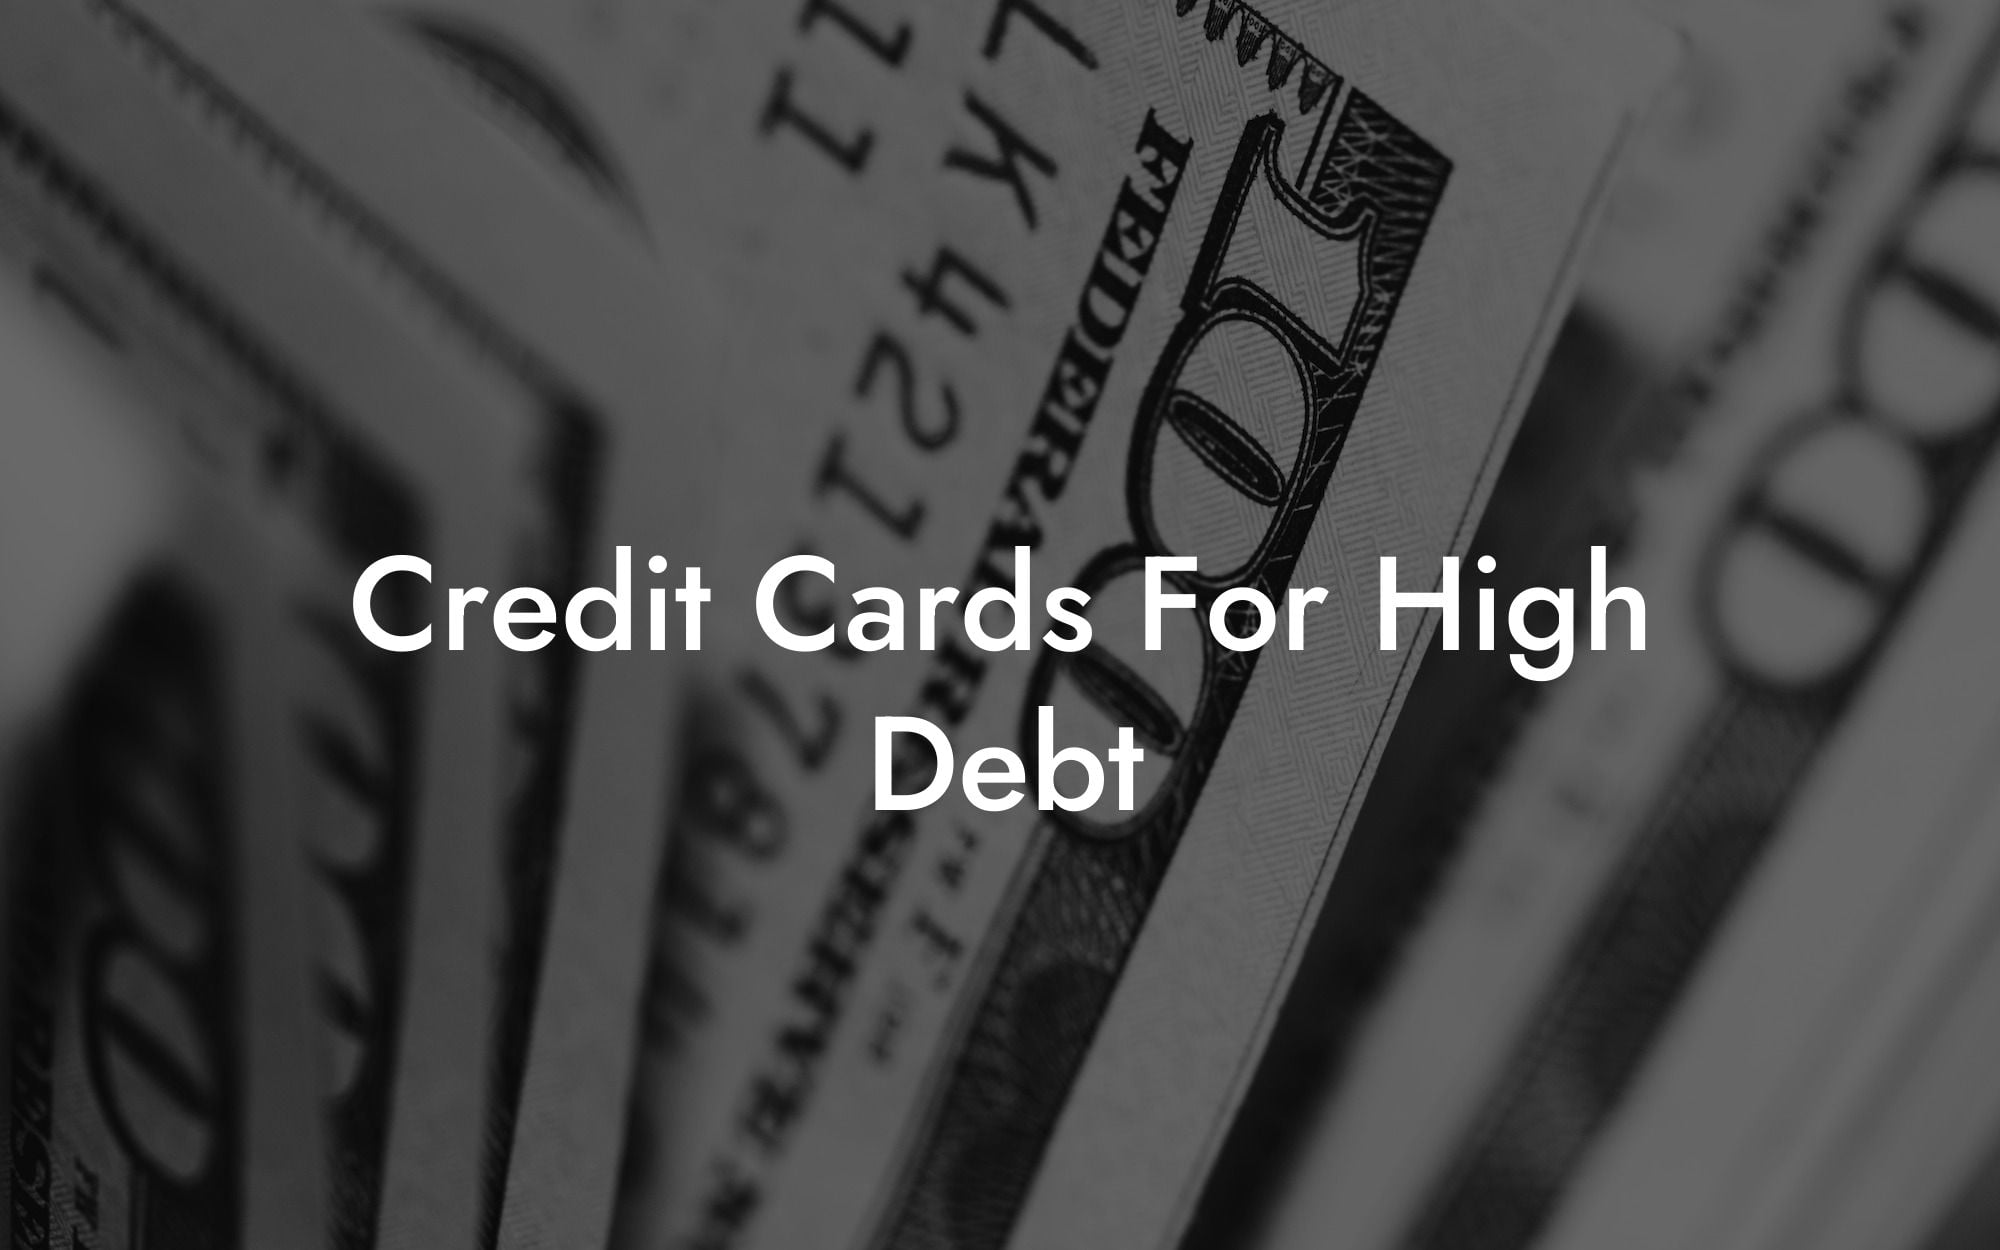 Credit Cards For High Debt